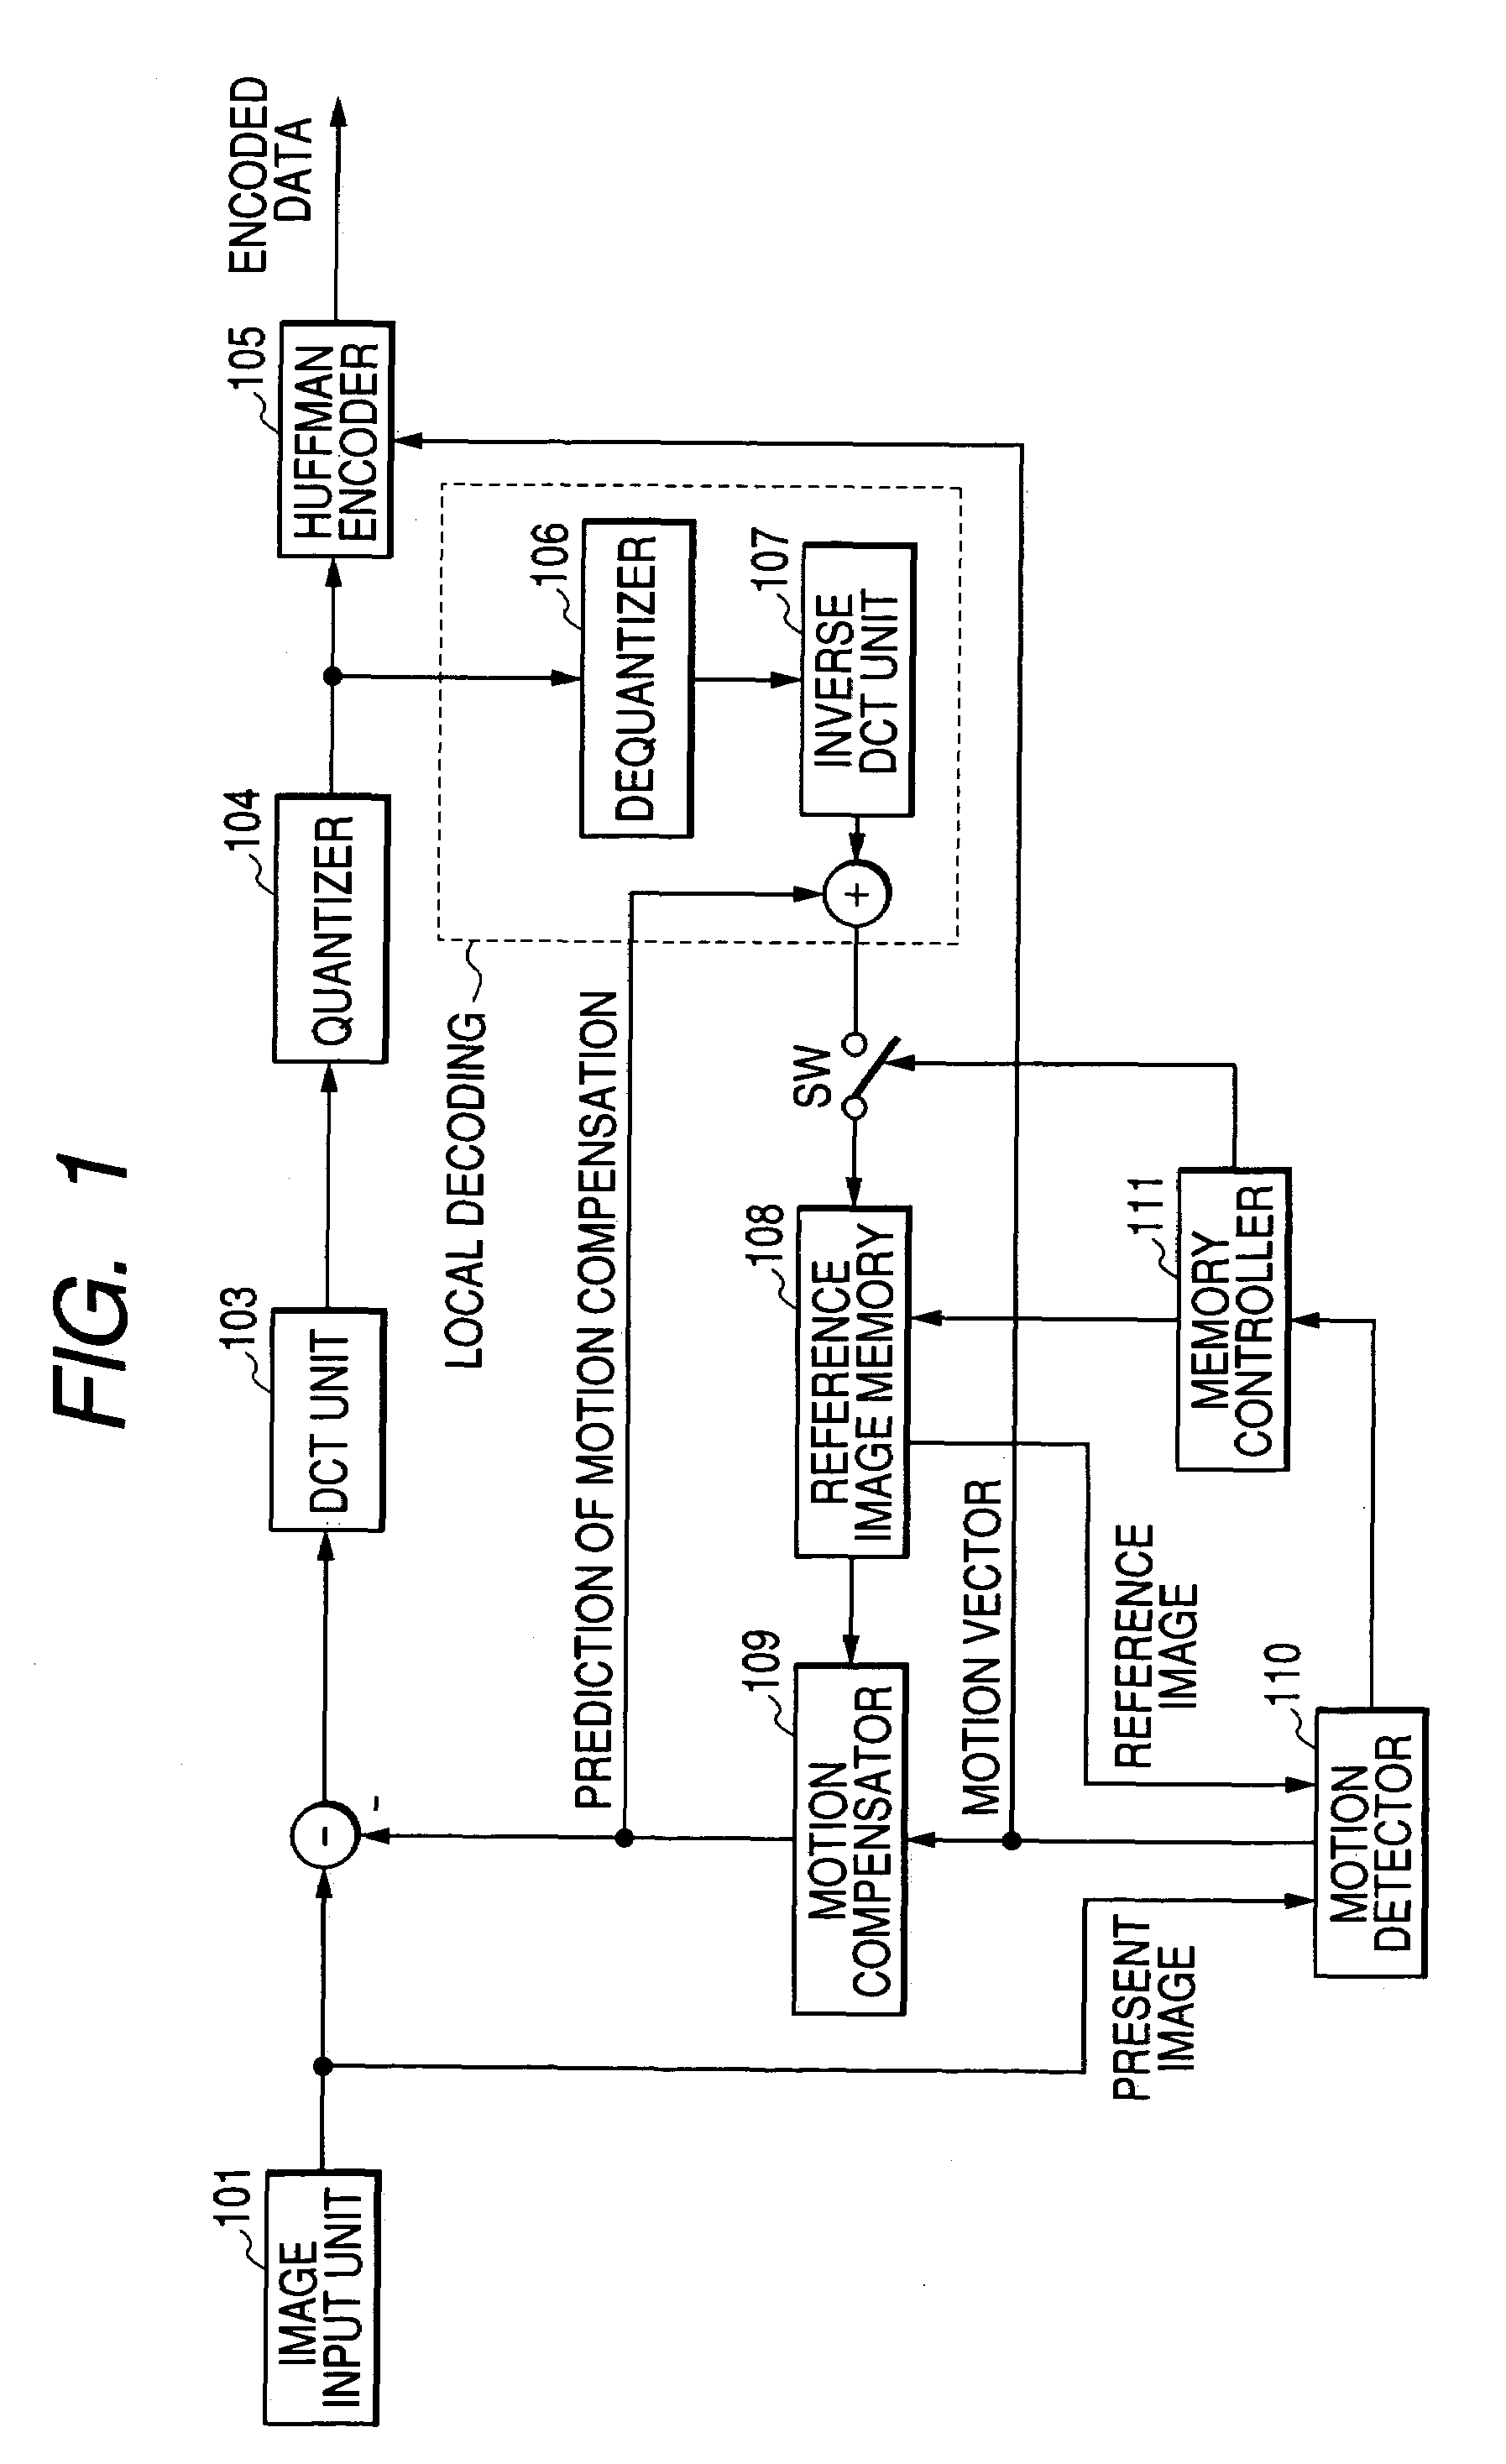 Moving image coding method and apparatus for determining a position of a macro block which is intra-coded or inter-coded